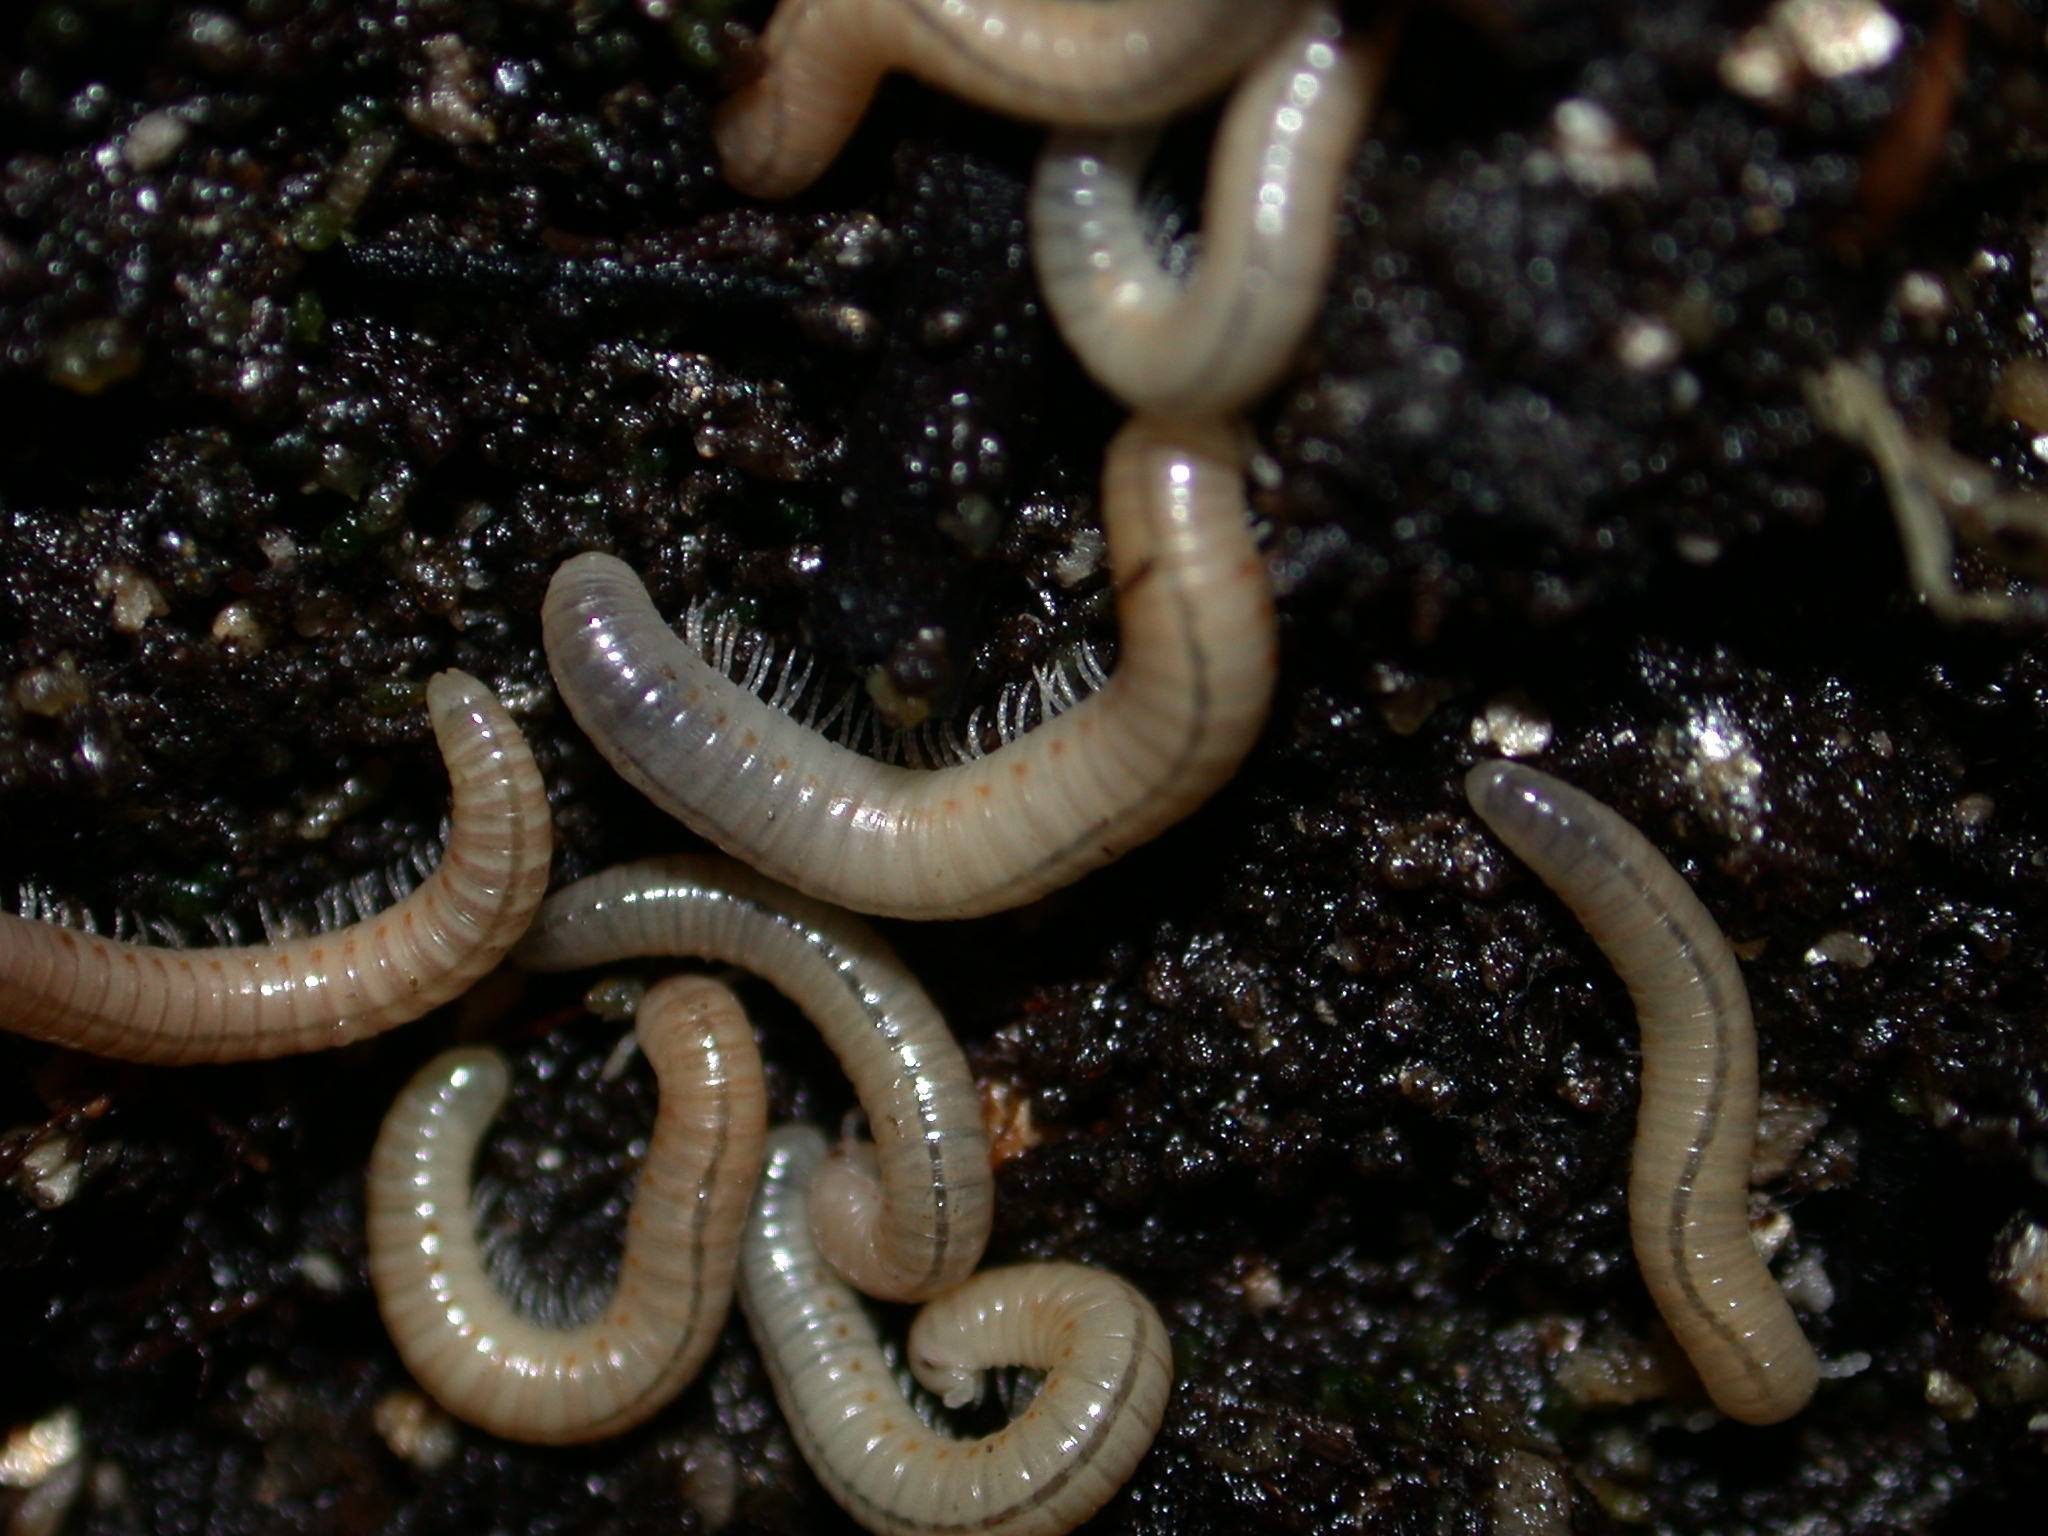 picture of baby giant millipedes